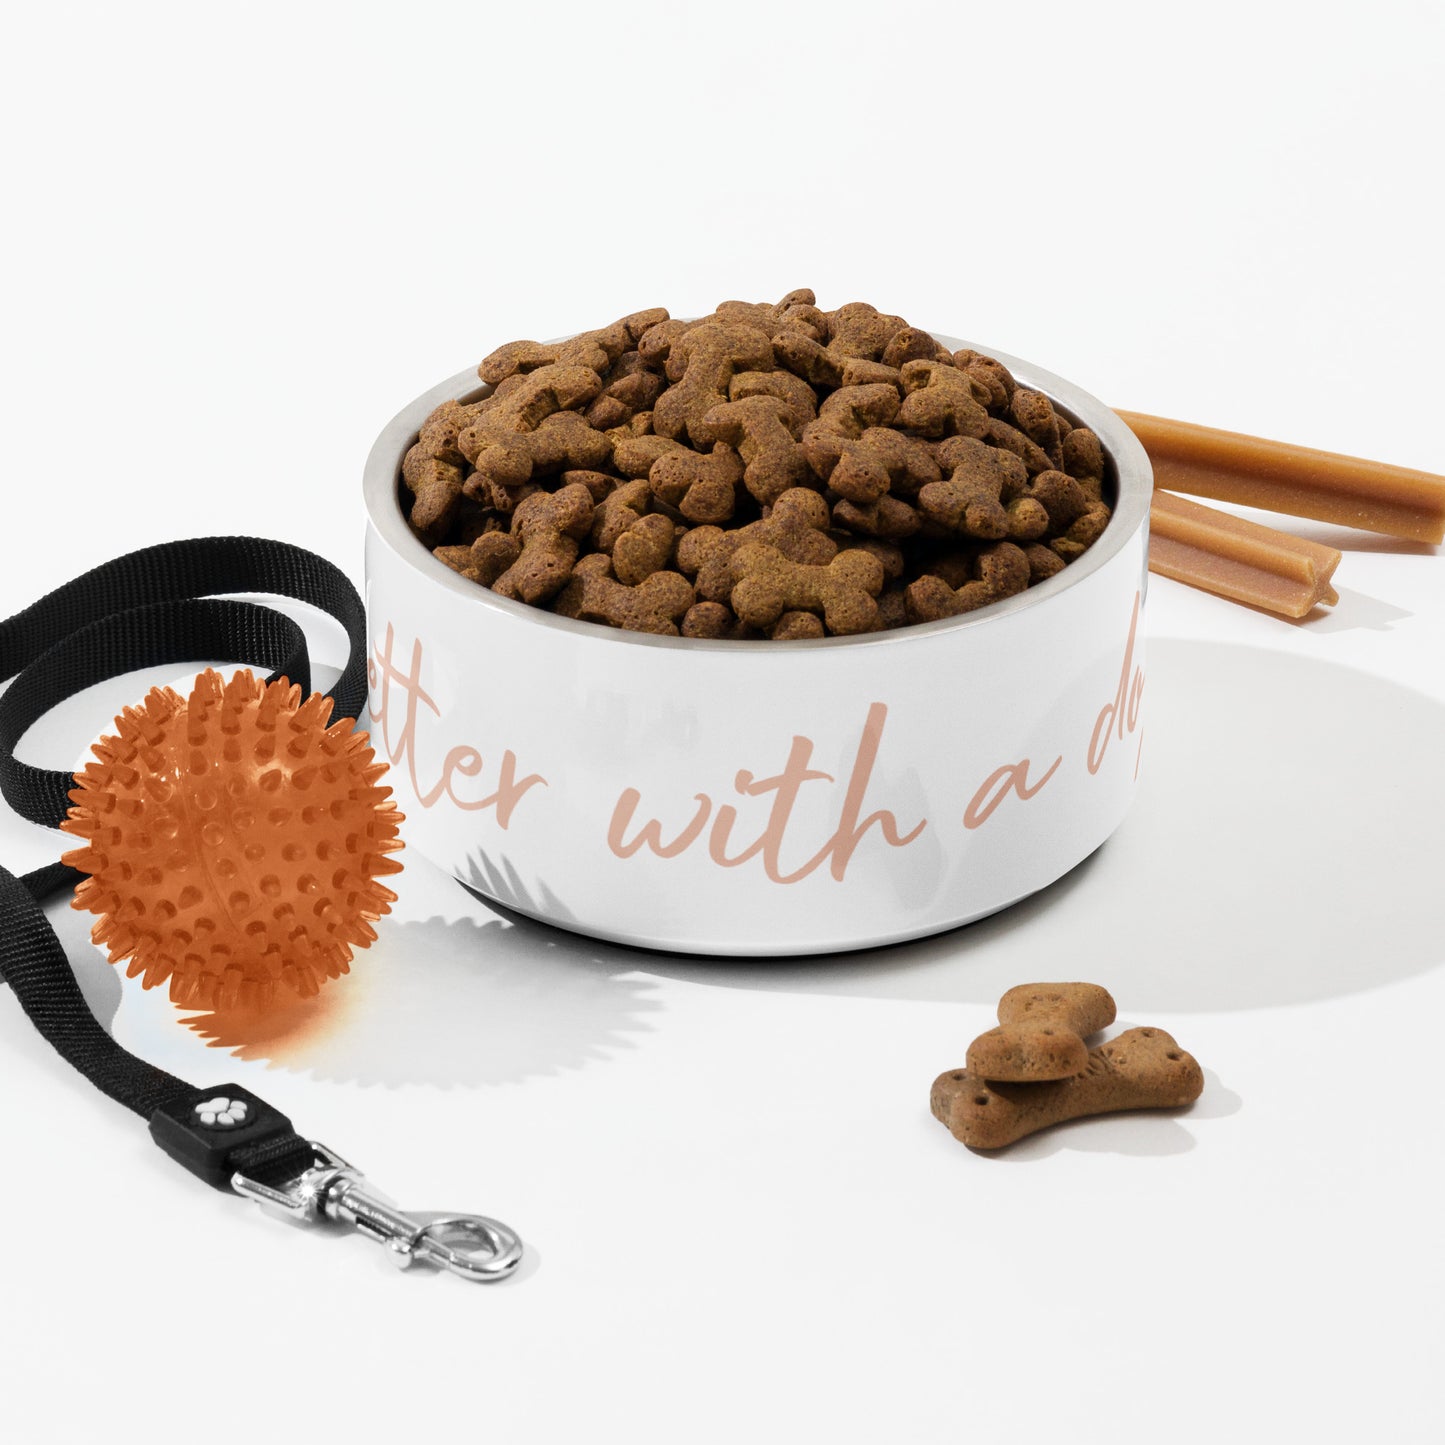 "Life is better with a dog" food cup